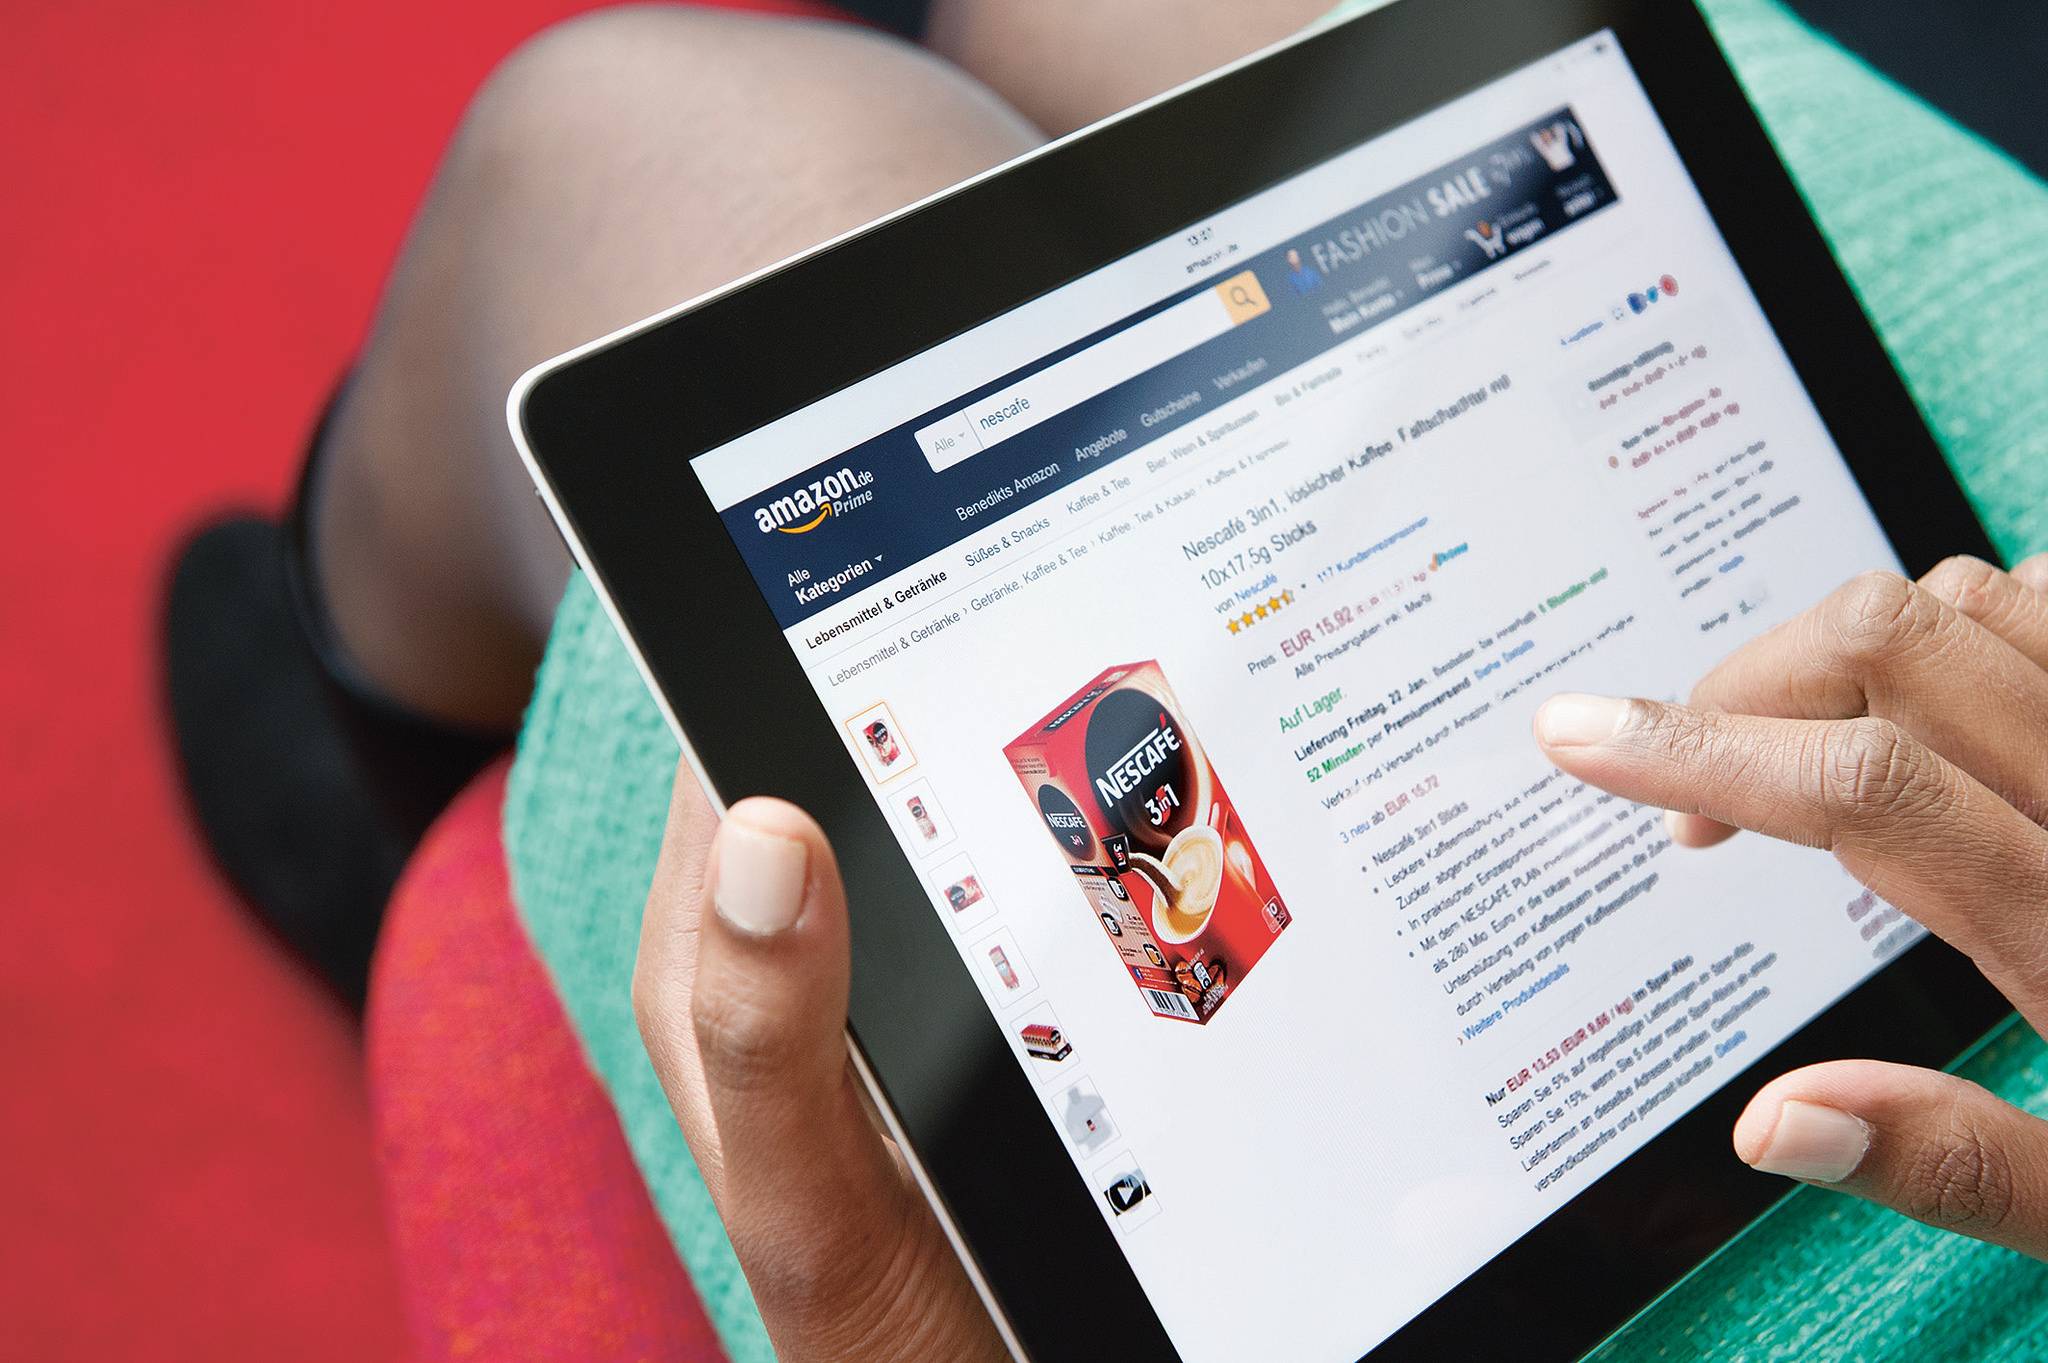 More Americans begin online shopping trips with Amazon